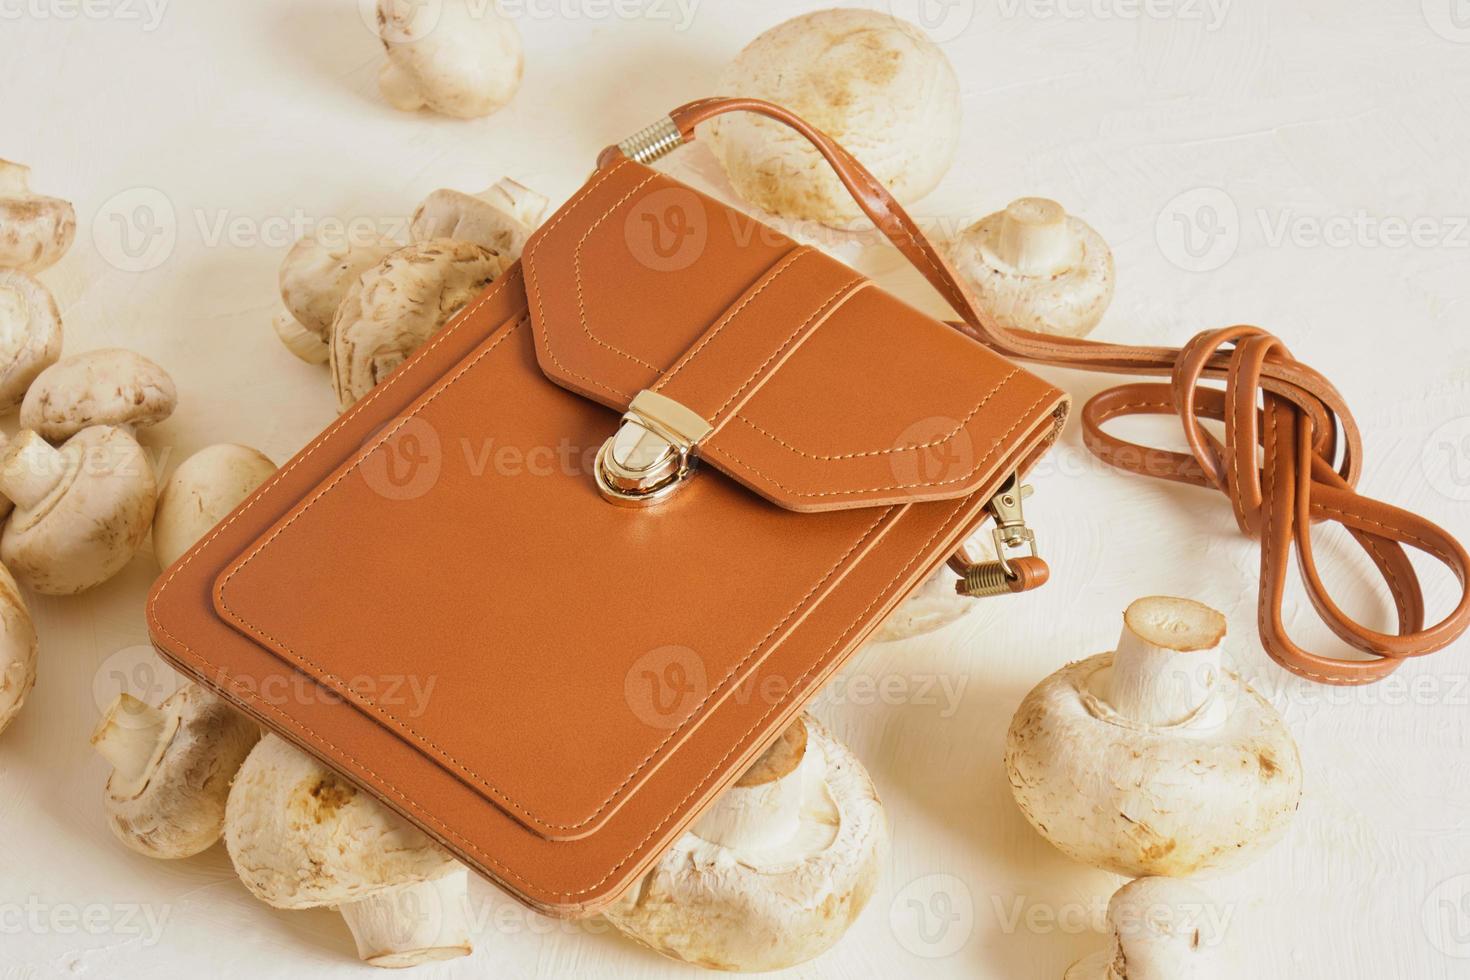 small brown bag for smartphone and credit cards and champignons on a beige background, vegan leather concept photo